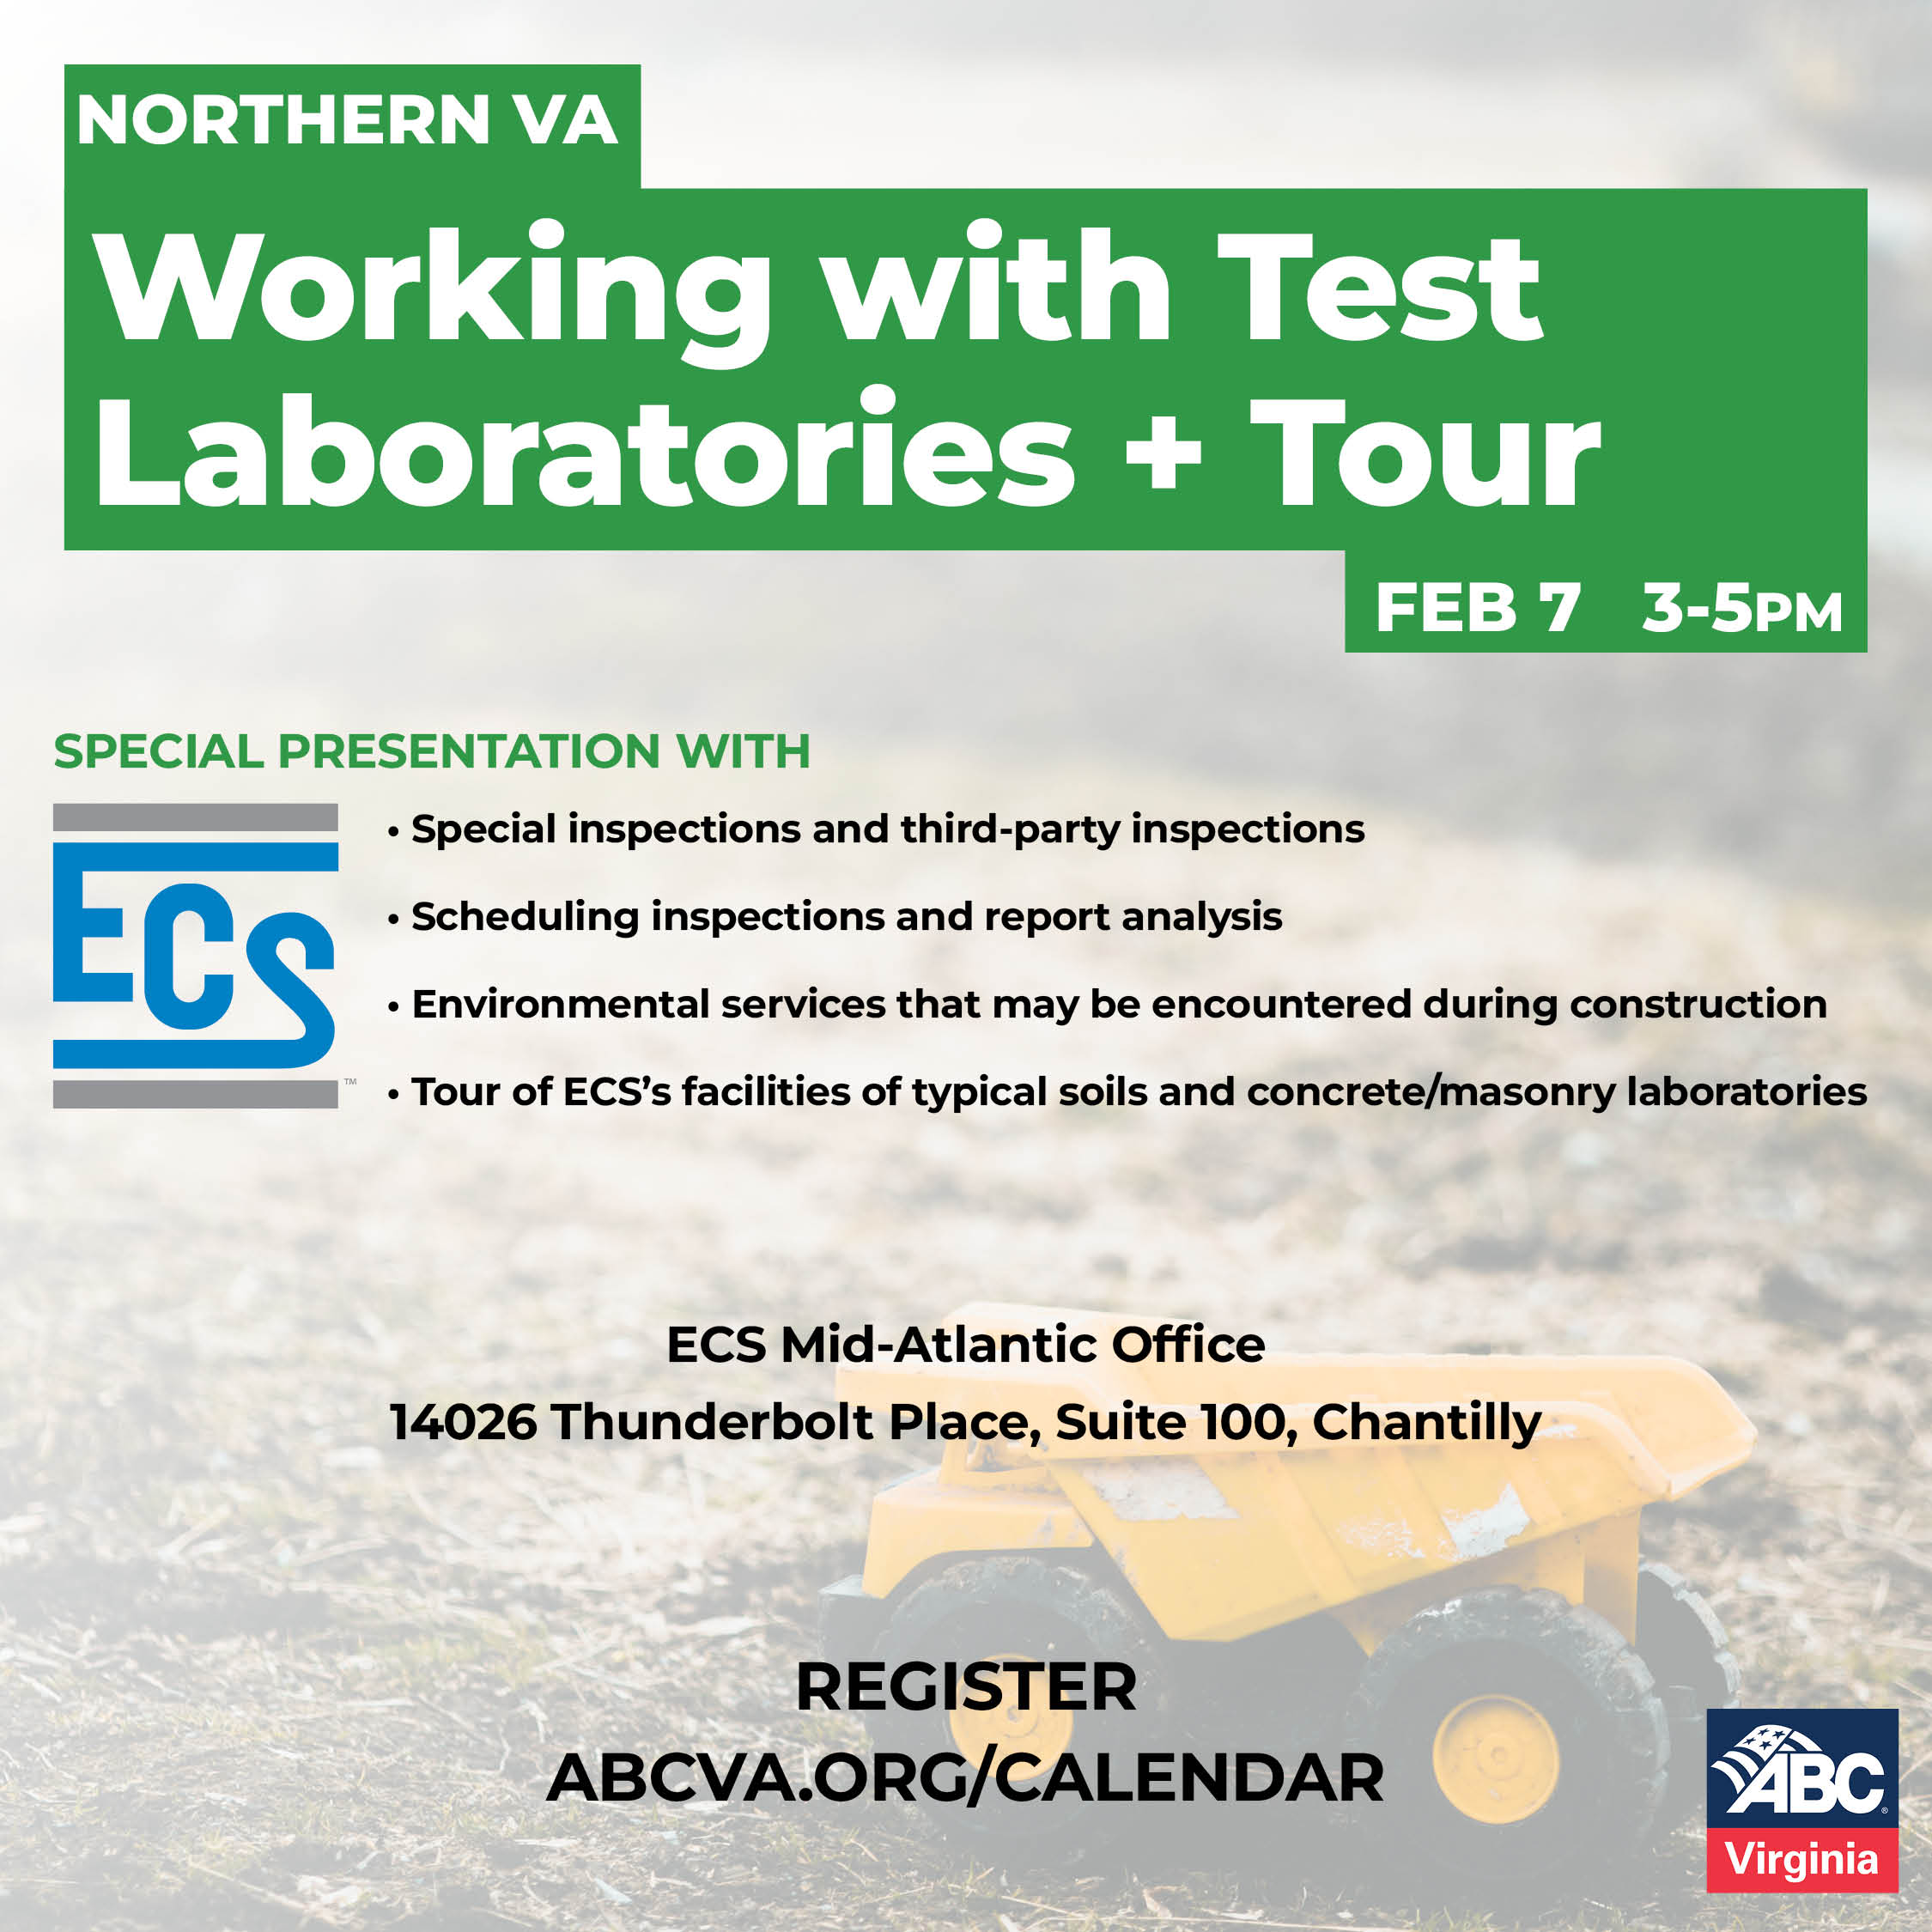 NV Working With Test Materials Feb 7 WEB Abc Virginia